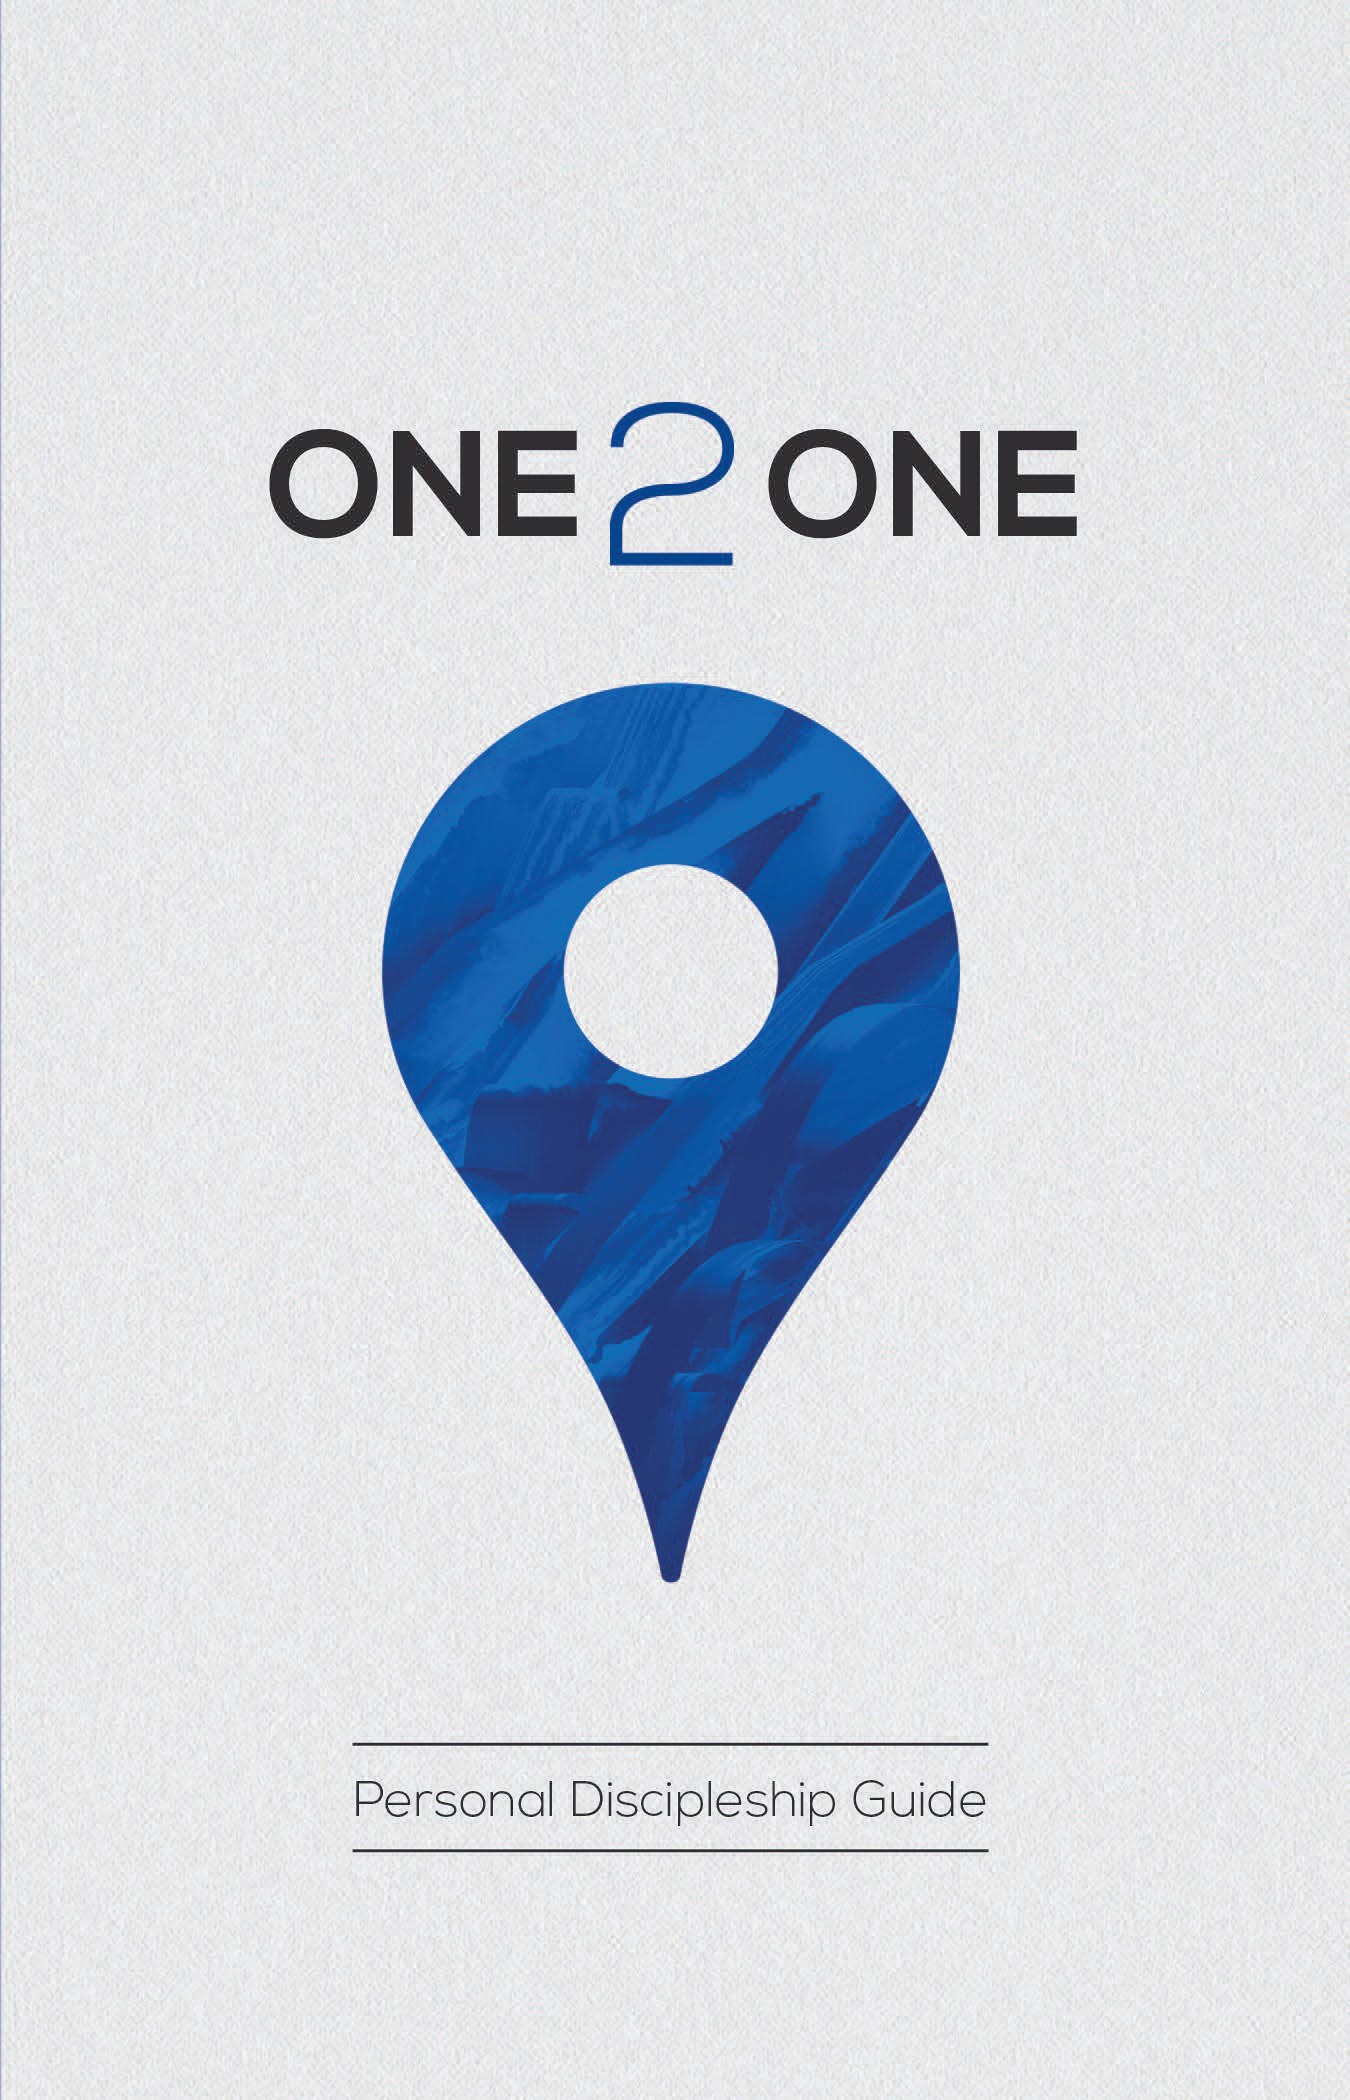 One 2 One: Personal Discipleship Guide